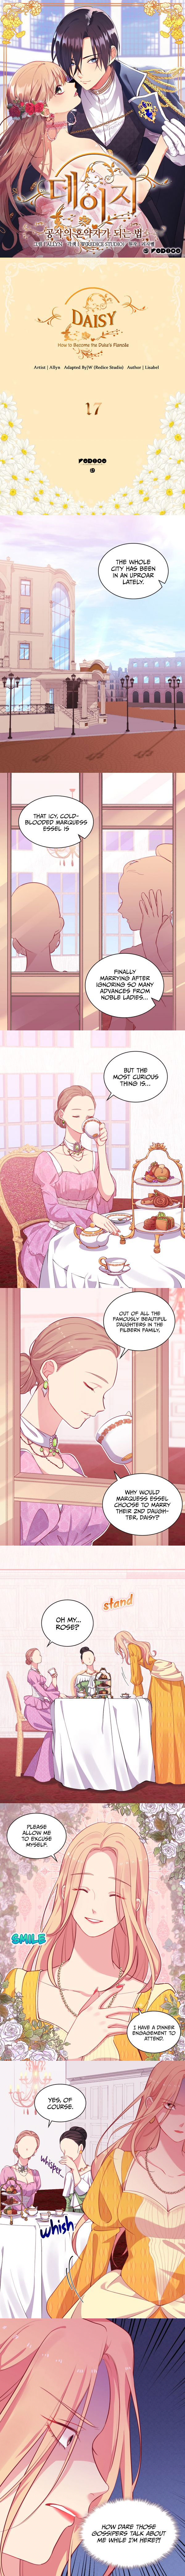 Daisy: How To Become The Duke's Fiancée Chapter 17 page 2